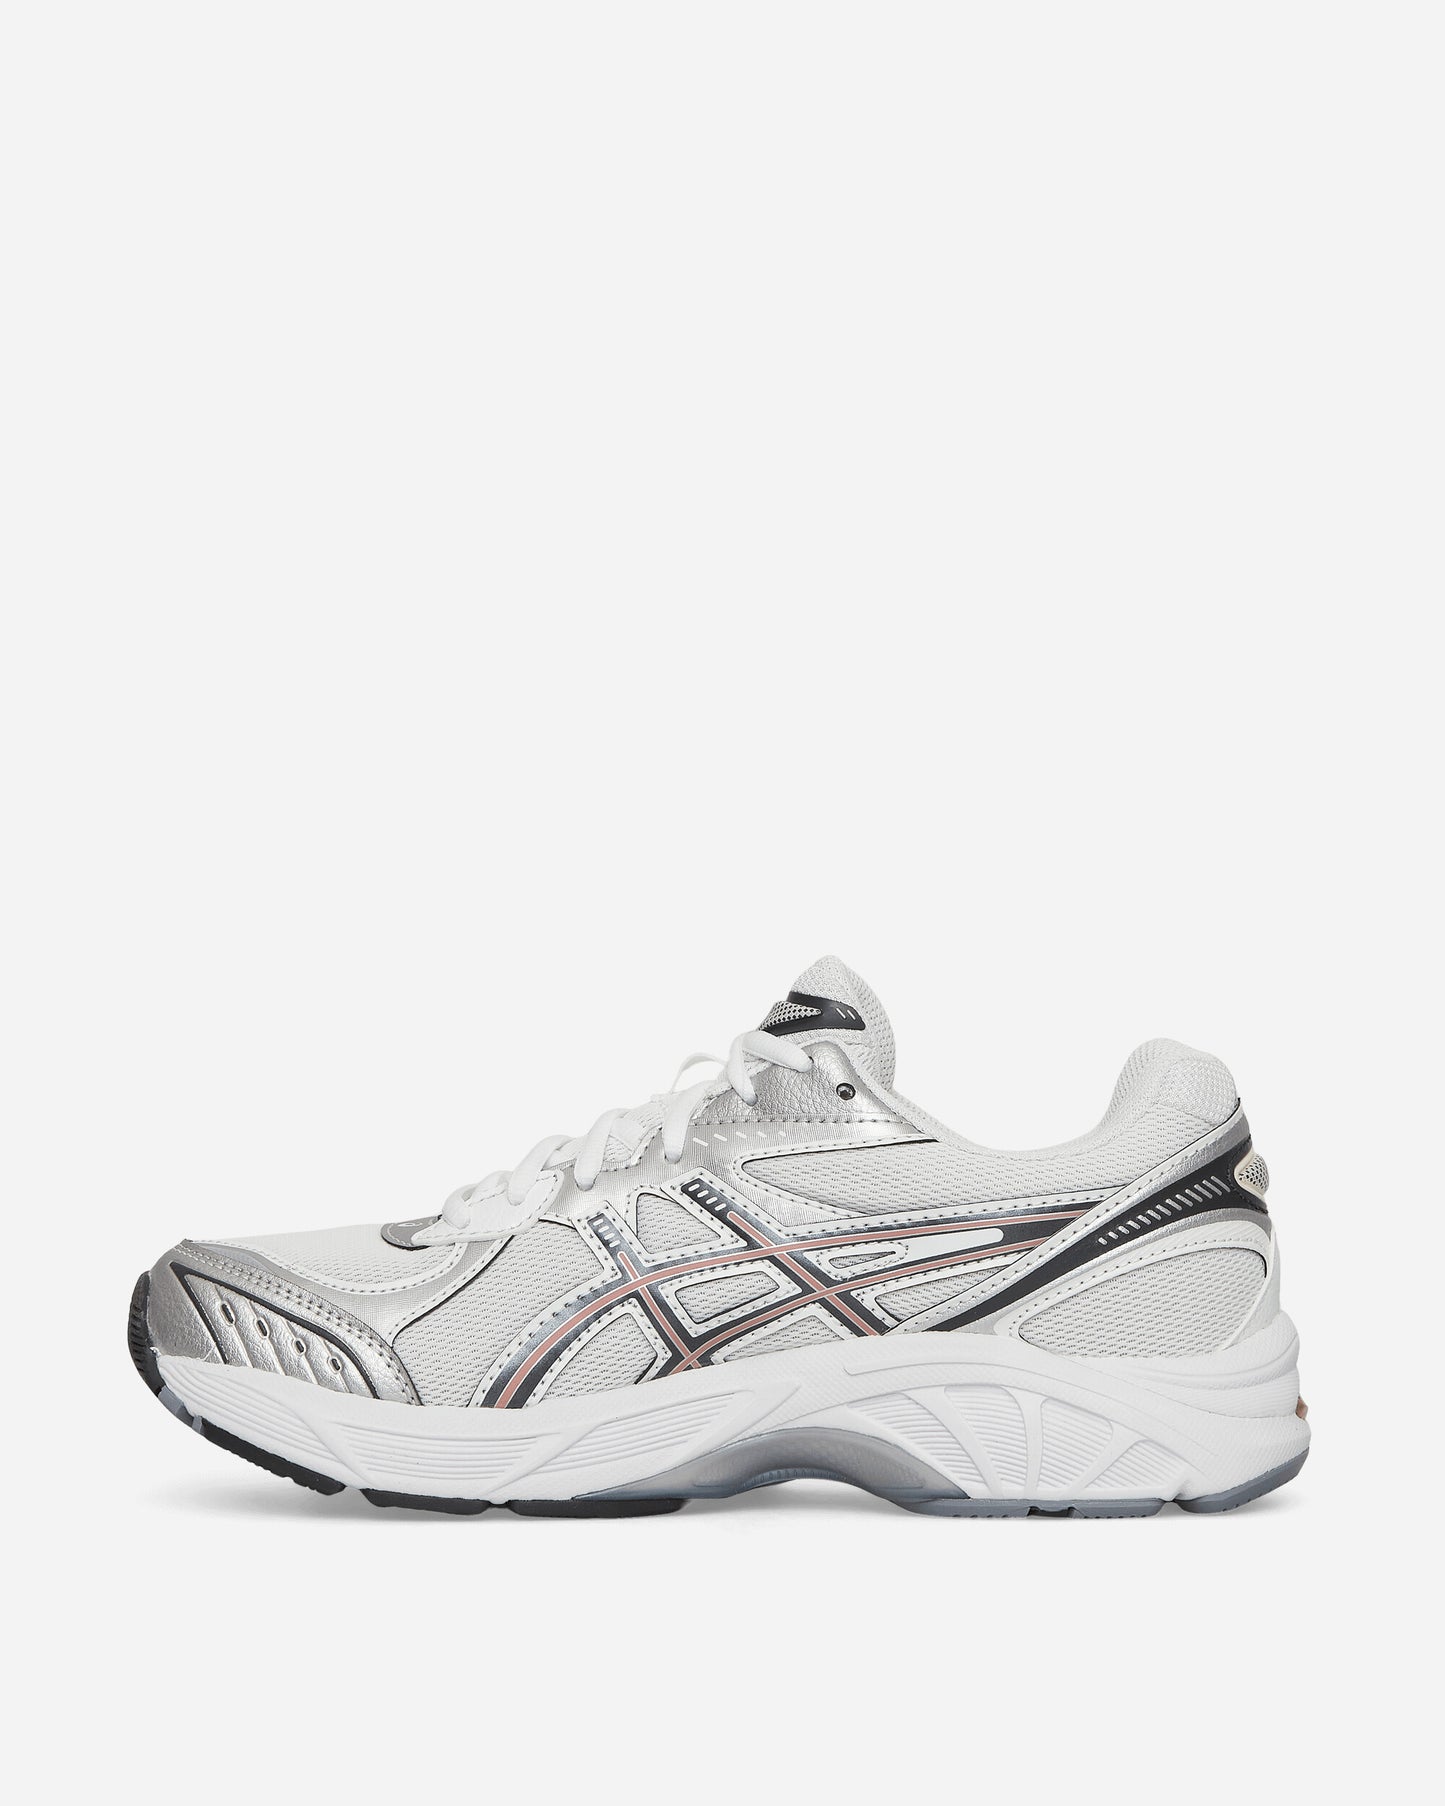 Asics Gt-2160 White/Rose Rouge Sneakers Low 1203A320-103